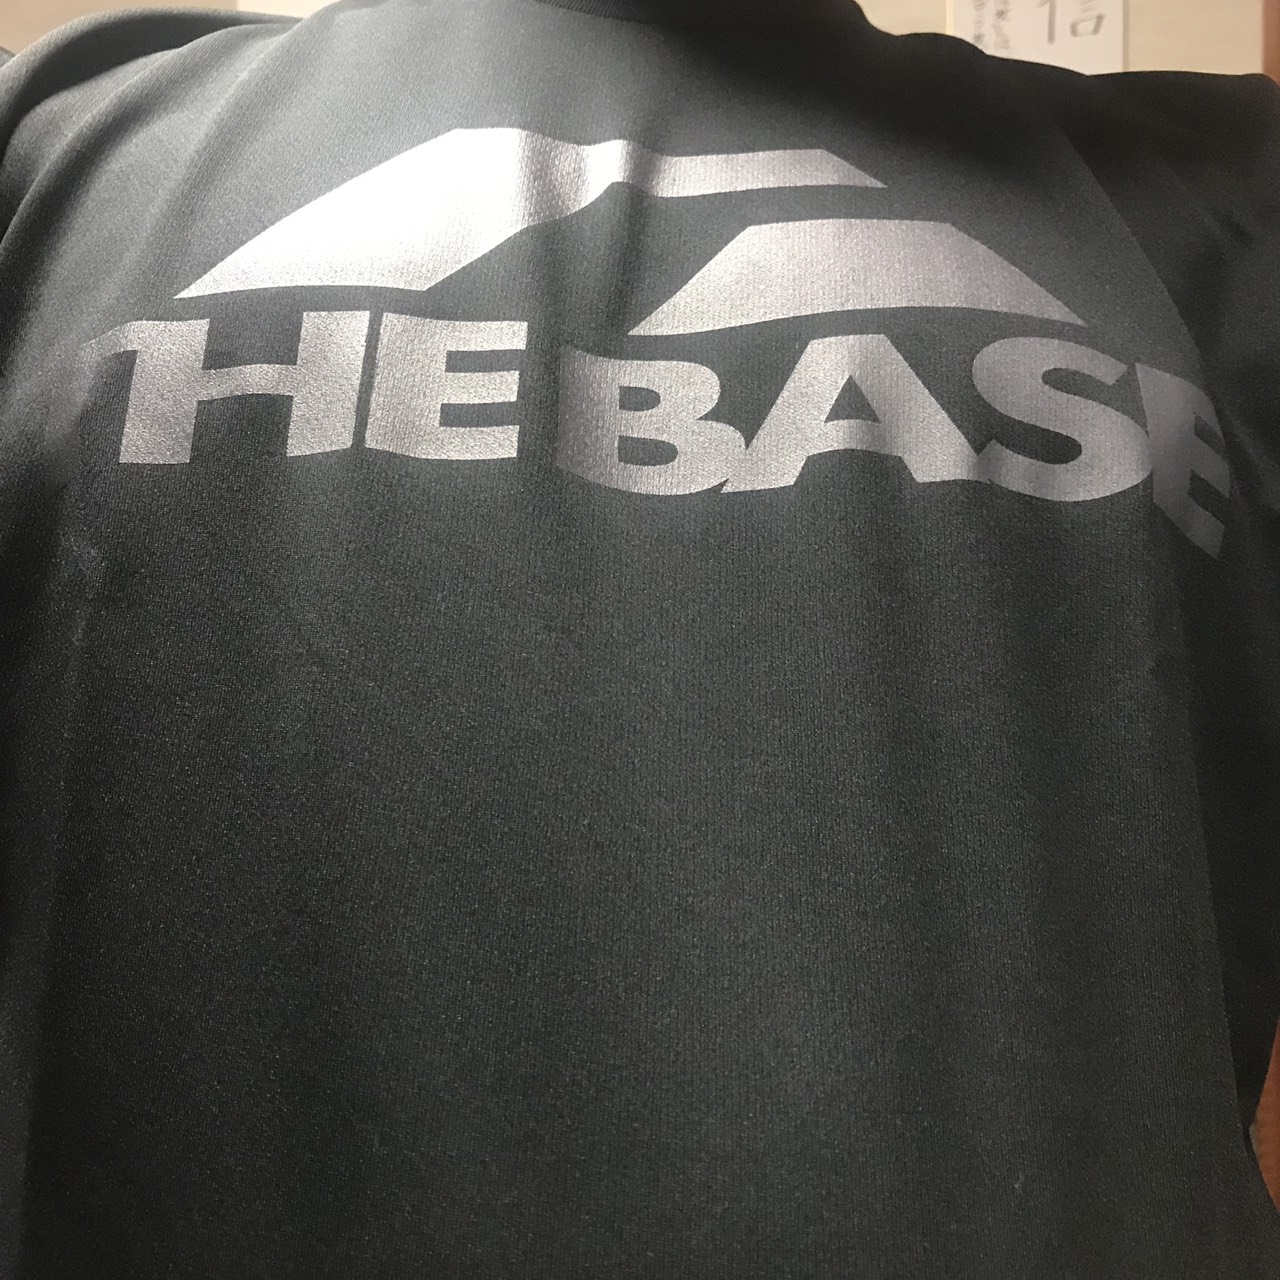 THE BASE Tシャツ